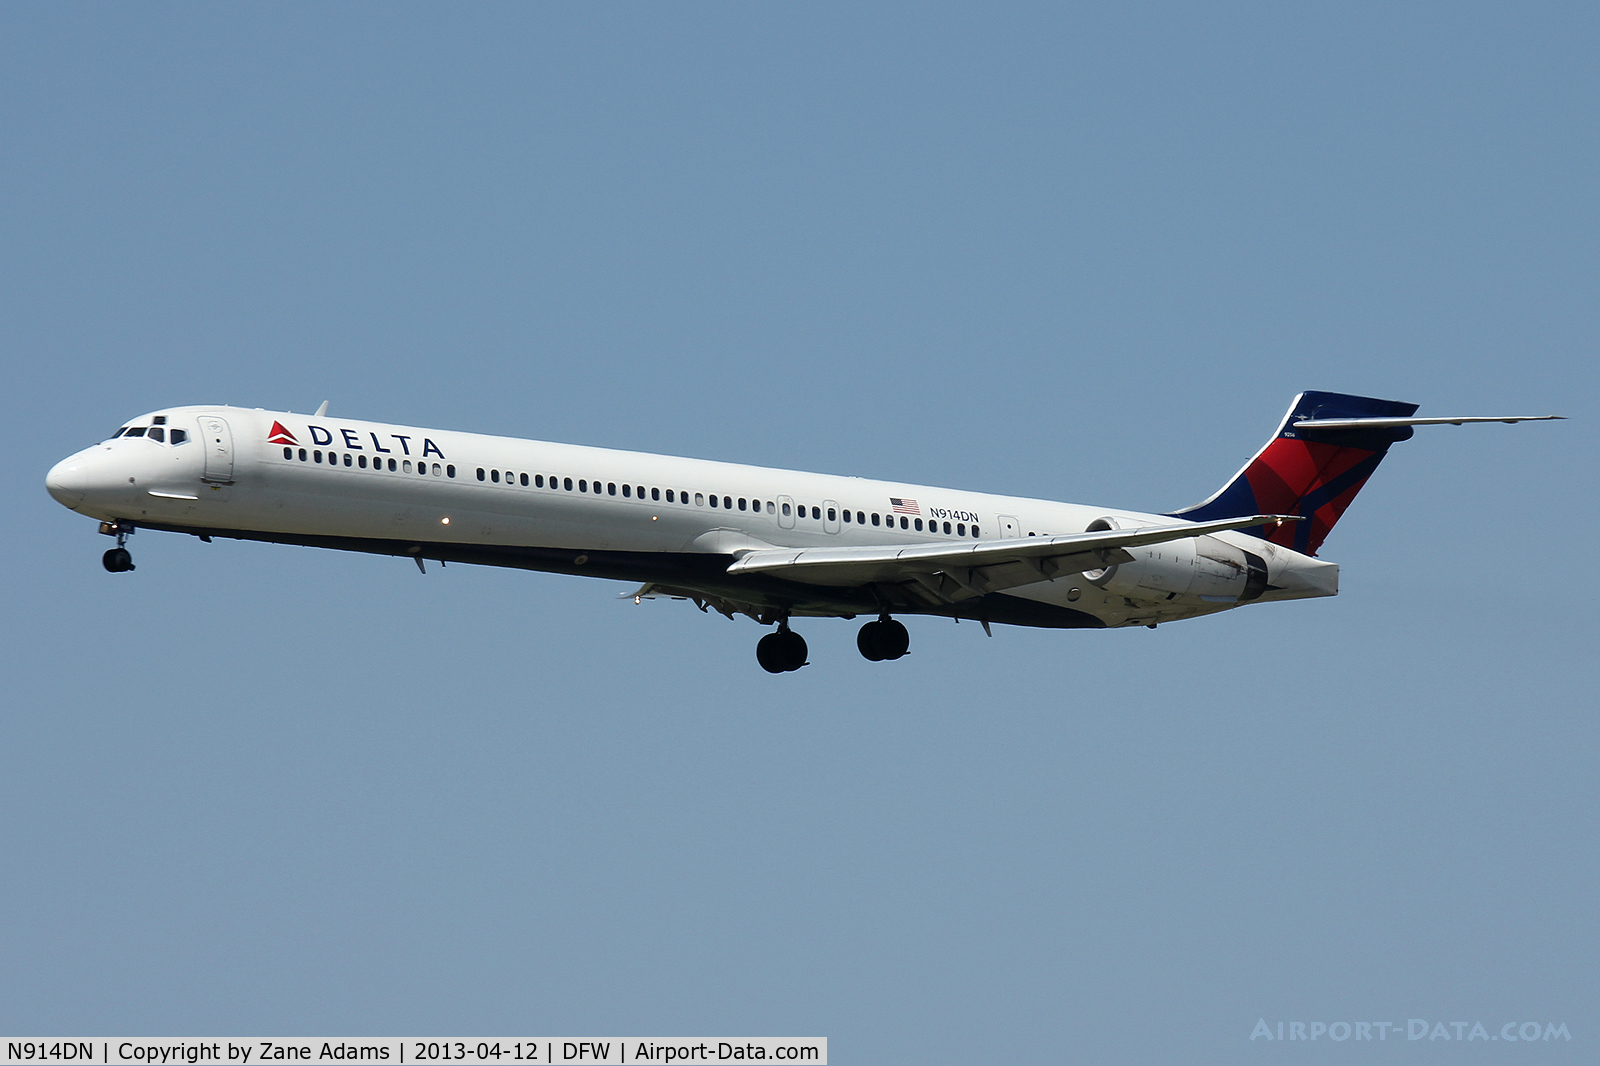 N914DN, 1996 McDonnell Douglas MD-90-30 C/N 53394, Delta Airlines landing at DFW Airport